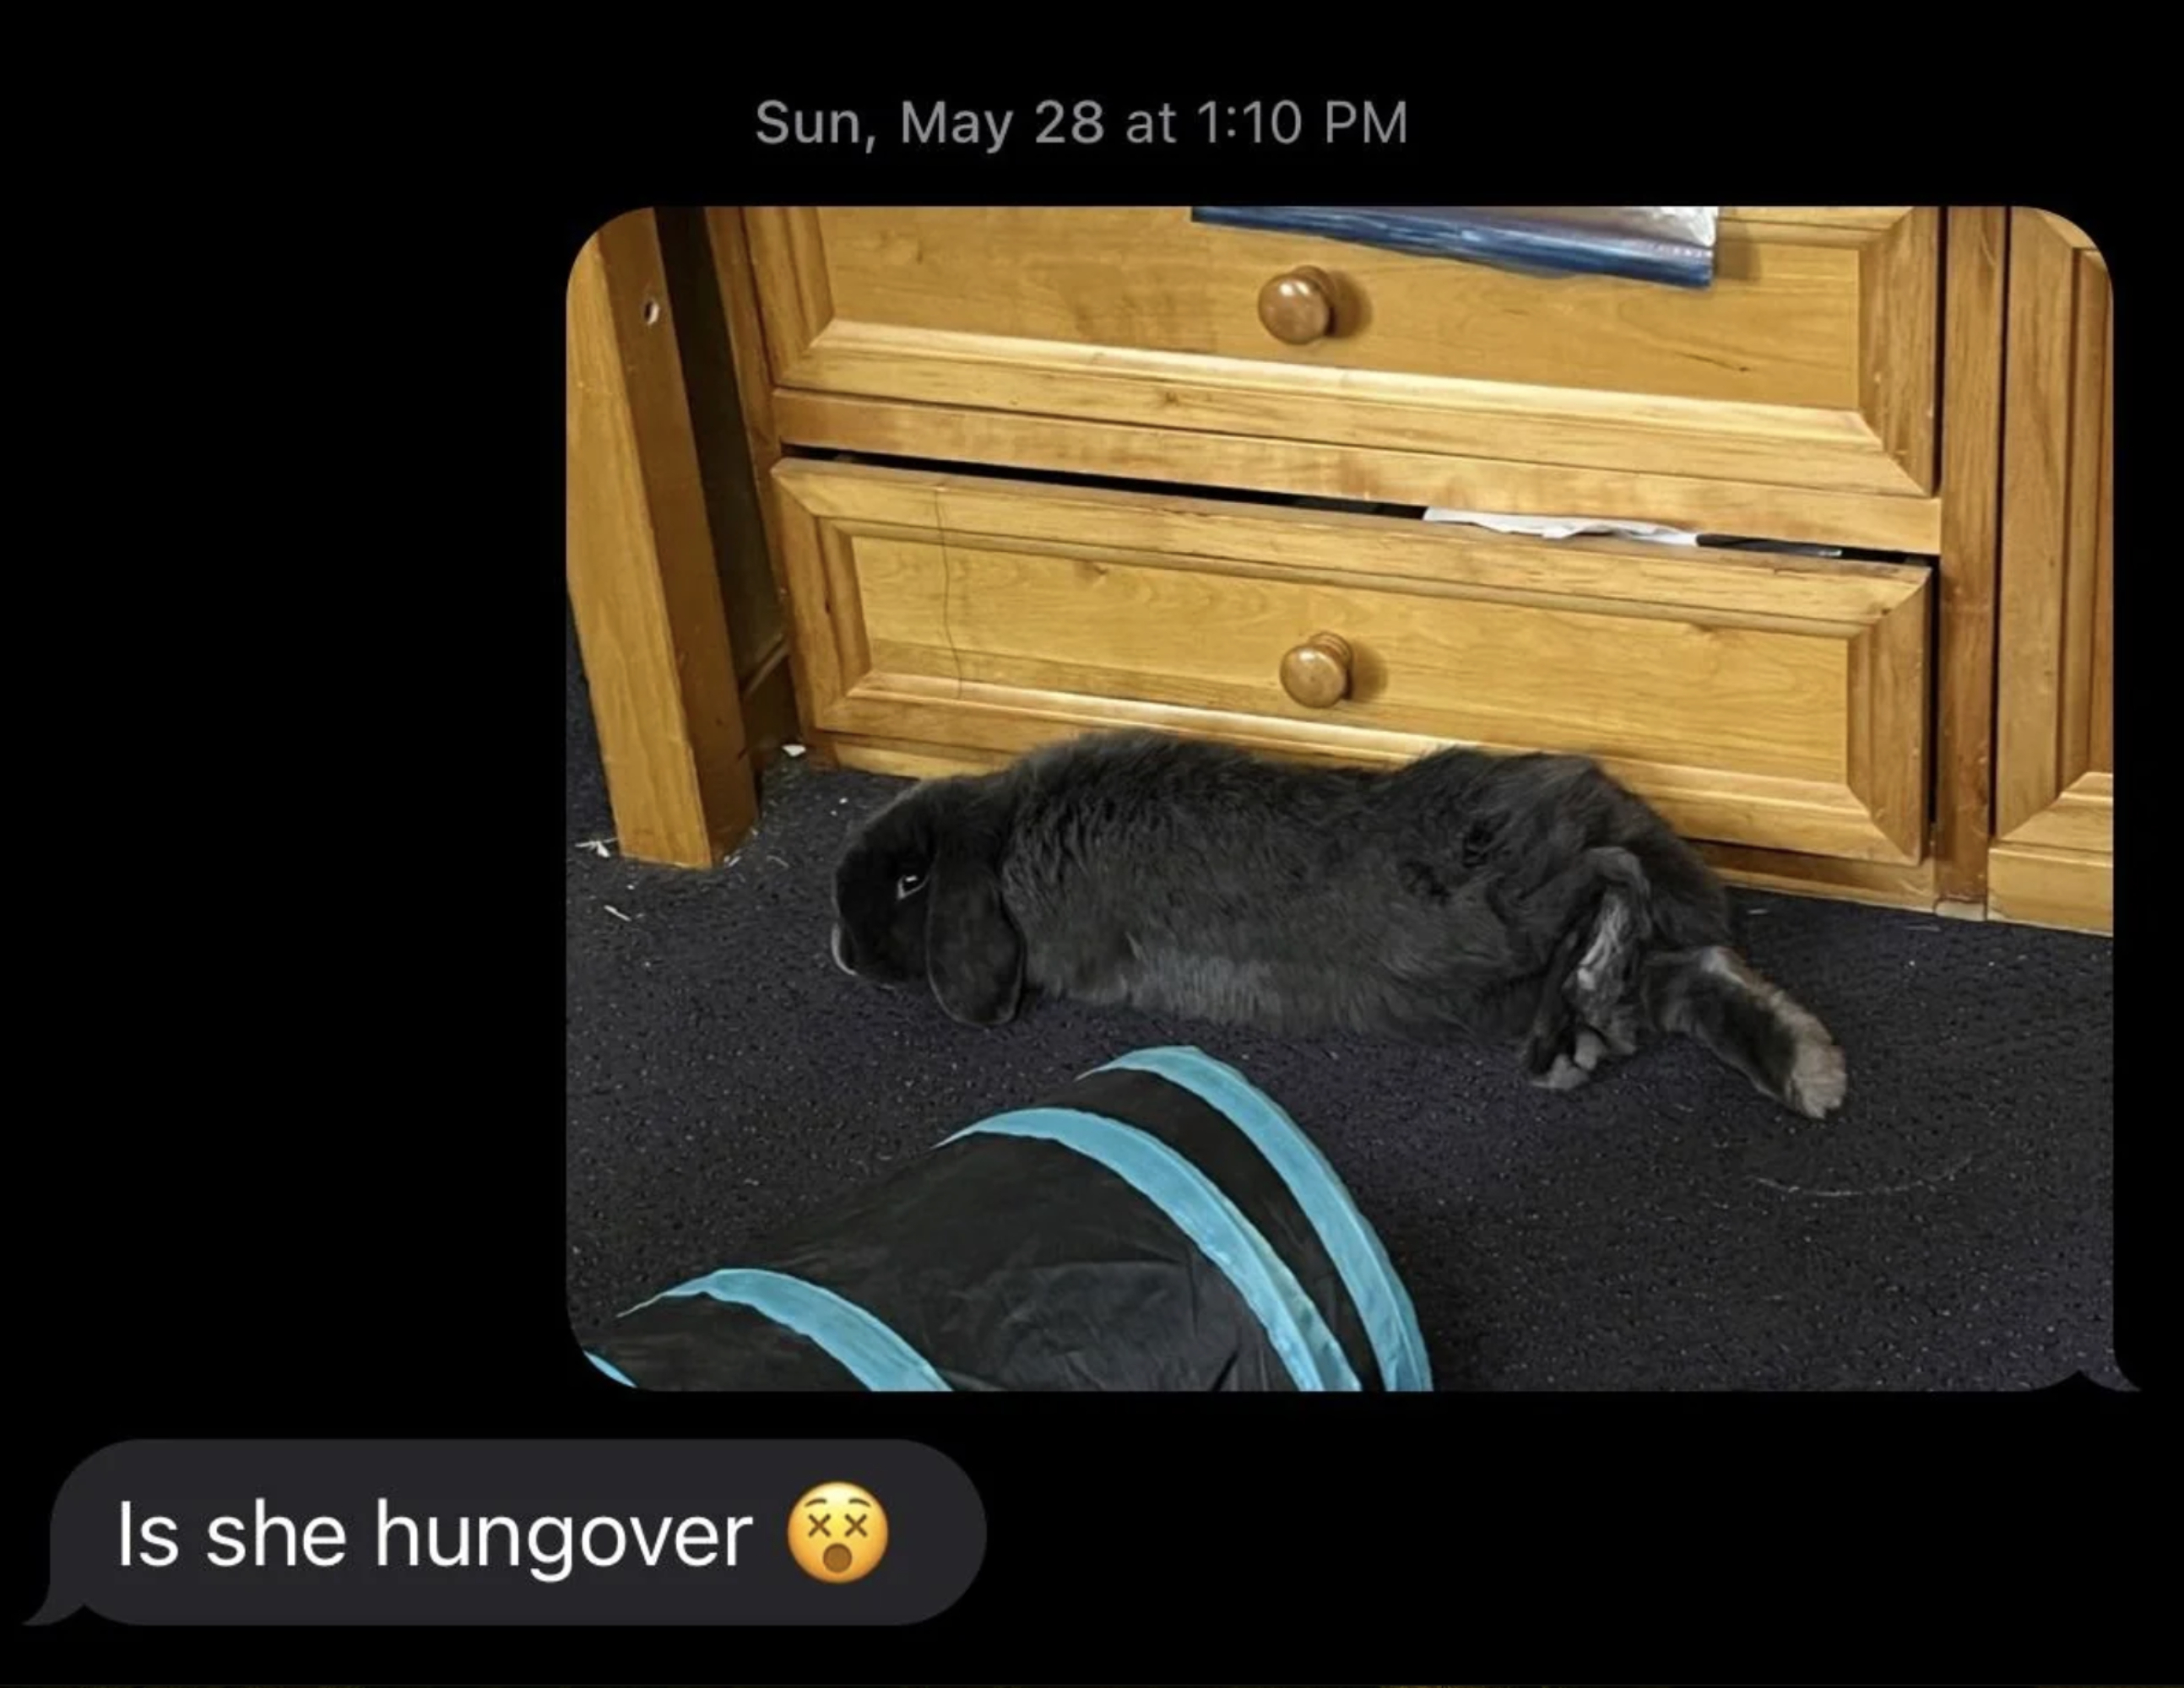 A black rabbit lies on the floor near a wooden dresser. The surrounding text reads: &quot;Is she hungover ?.&quot;